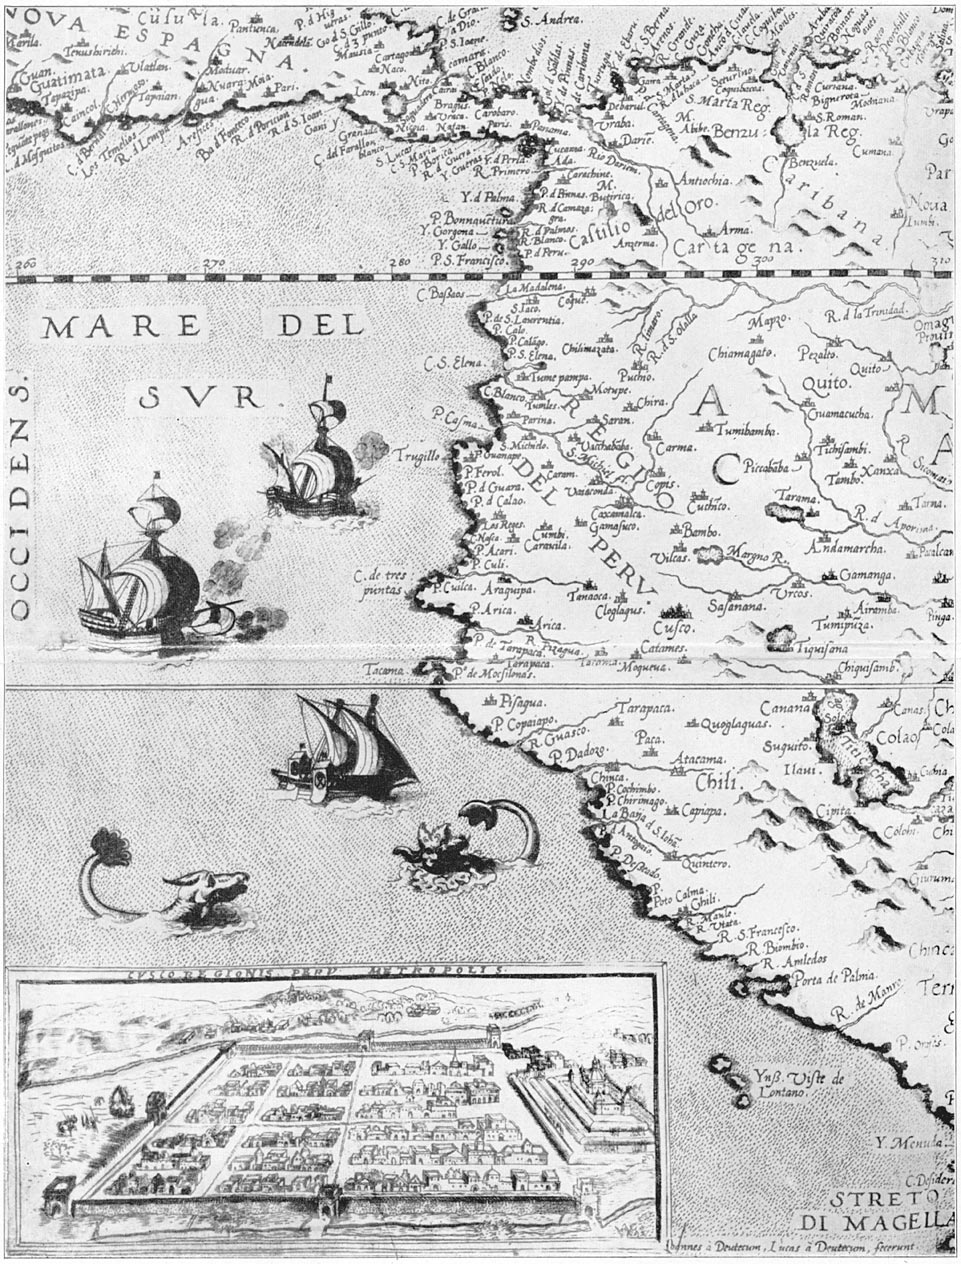 Map of Peru and view of Cuzco